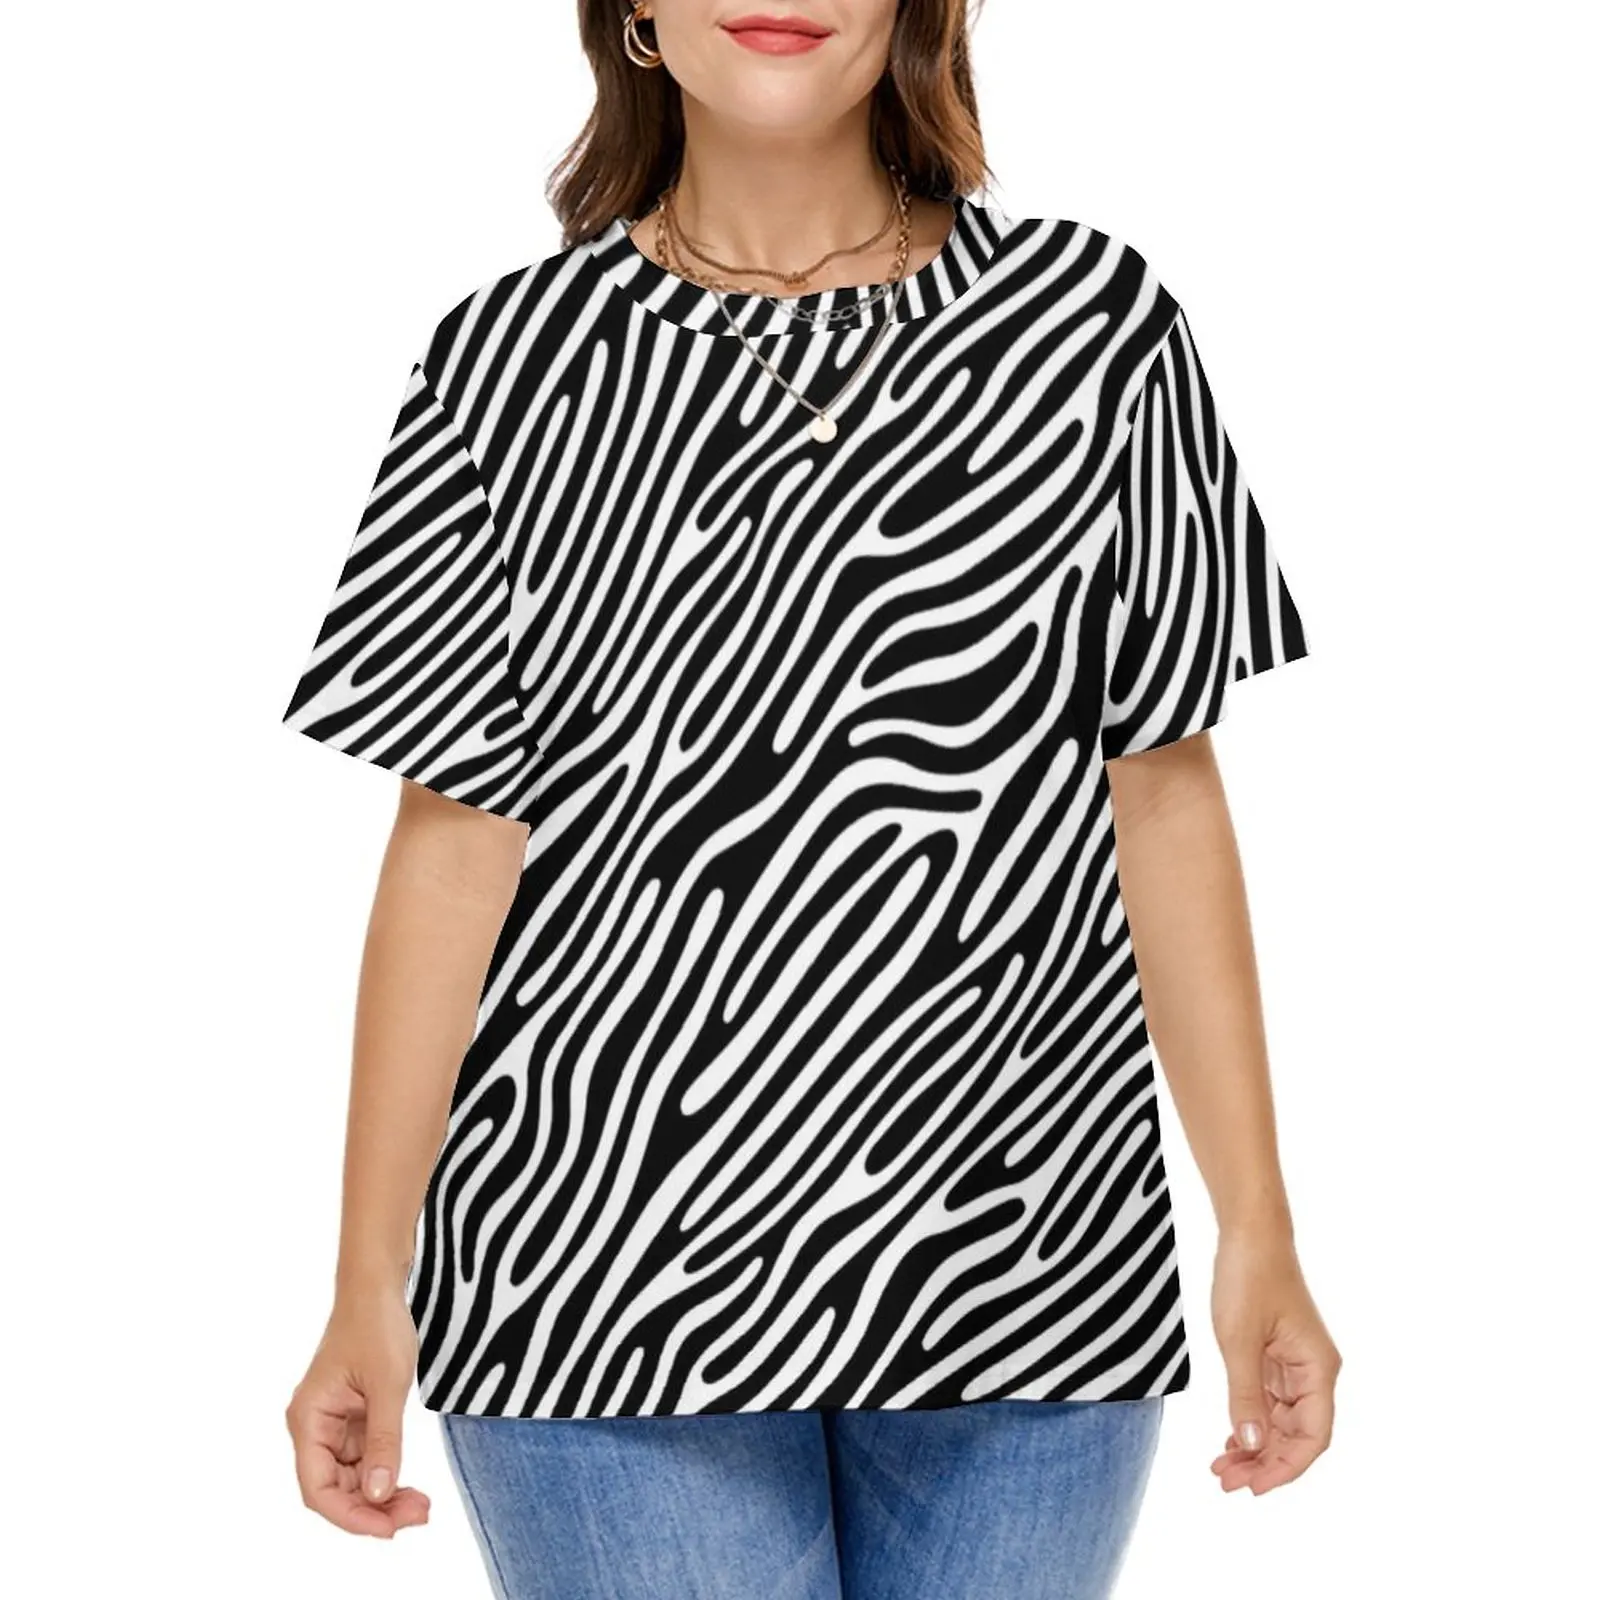 Zebra Strip Druck T Shirts Black And White Street Style T-Shirt Short Sleeve Funny Tees Plus Size 7XL 8XL Graphic Tops Gift